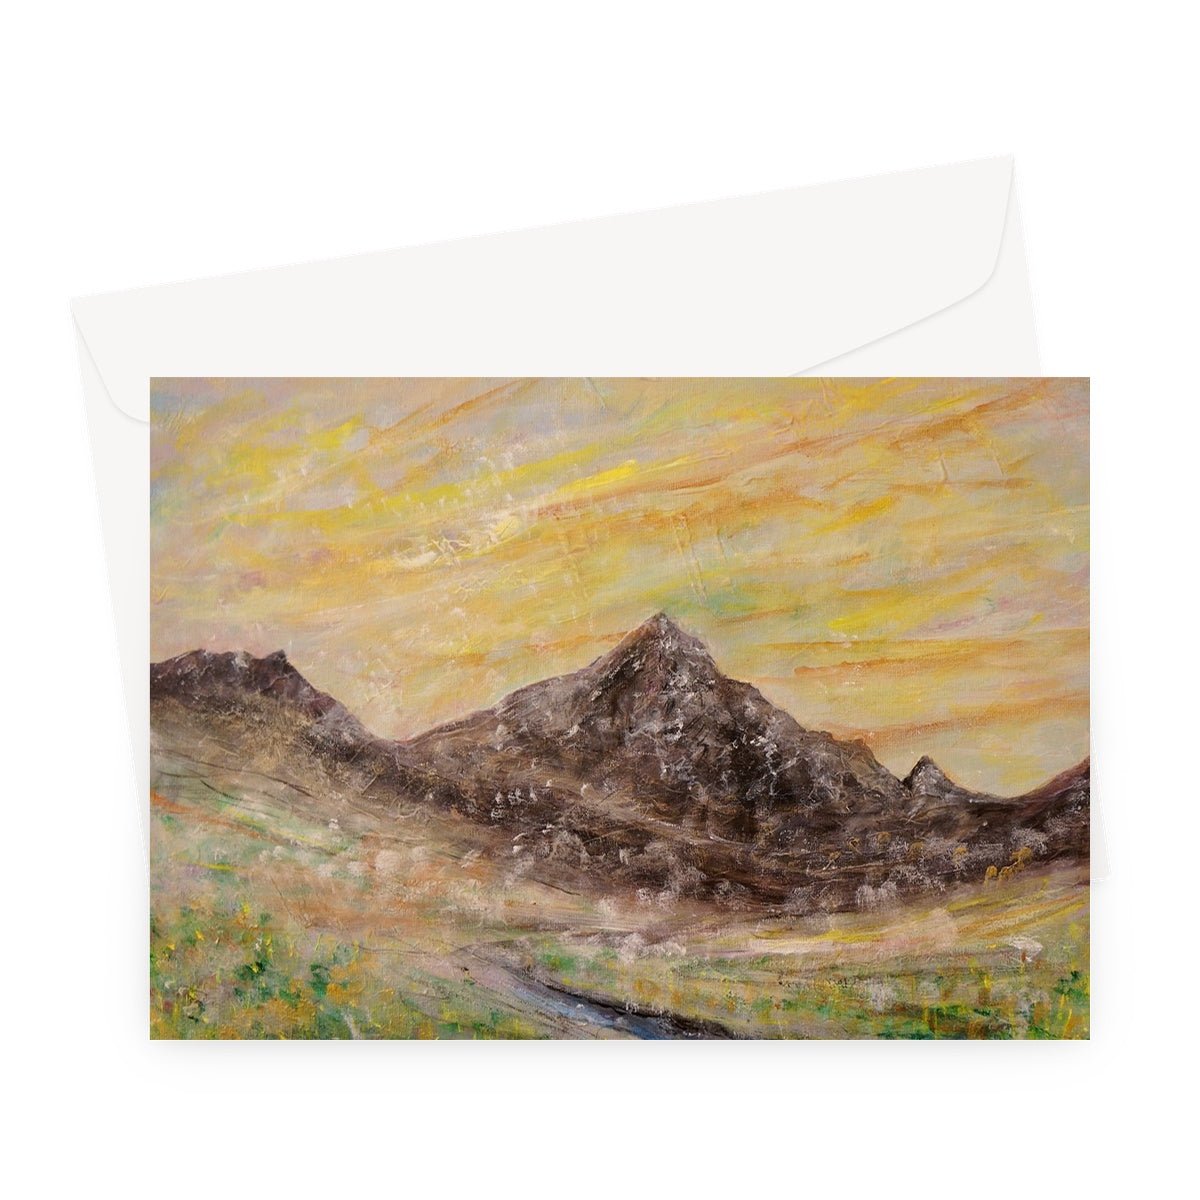 Glen Rosa Mist Arran Art Gifts Greeting Card-Greetings Cards-Arran Art Gallery-A5 Landscape-10 Cards-Paintings, Prints, Homeware, Art Gifts From Scotland By Scottish Artist Kevin Hunter